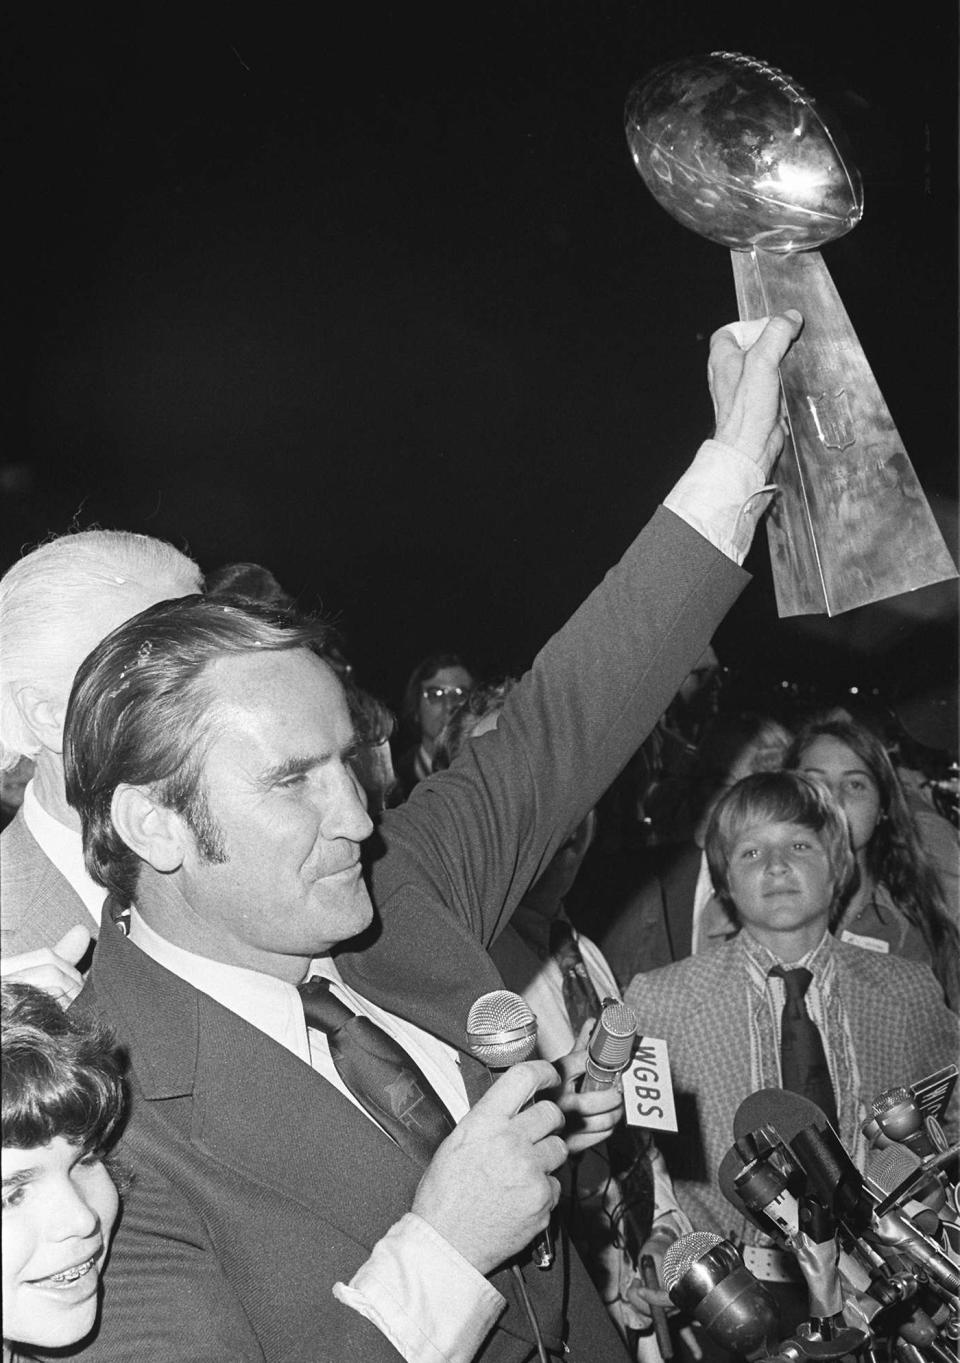 FILE- Miami Dolphins coach Don Shula waves the Vince Lombardi trophy, Jan. 15, 1973, as the team arrives in Miami after winning the Super Bowl. Shula's son David looks on at right. The Dolphins defeated the Washington Redskins in Super Bowl VII to become the first and still, the only team to have an undefeated season. (AP Photo/File)